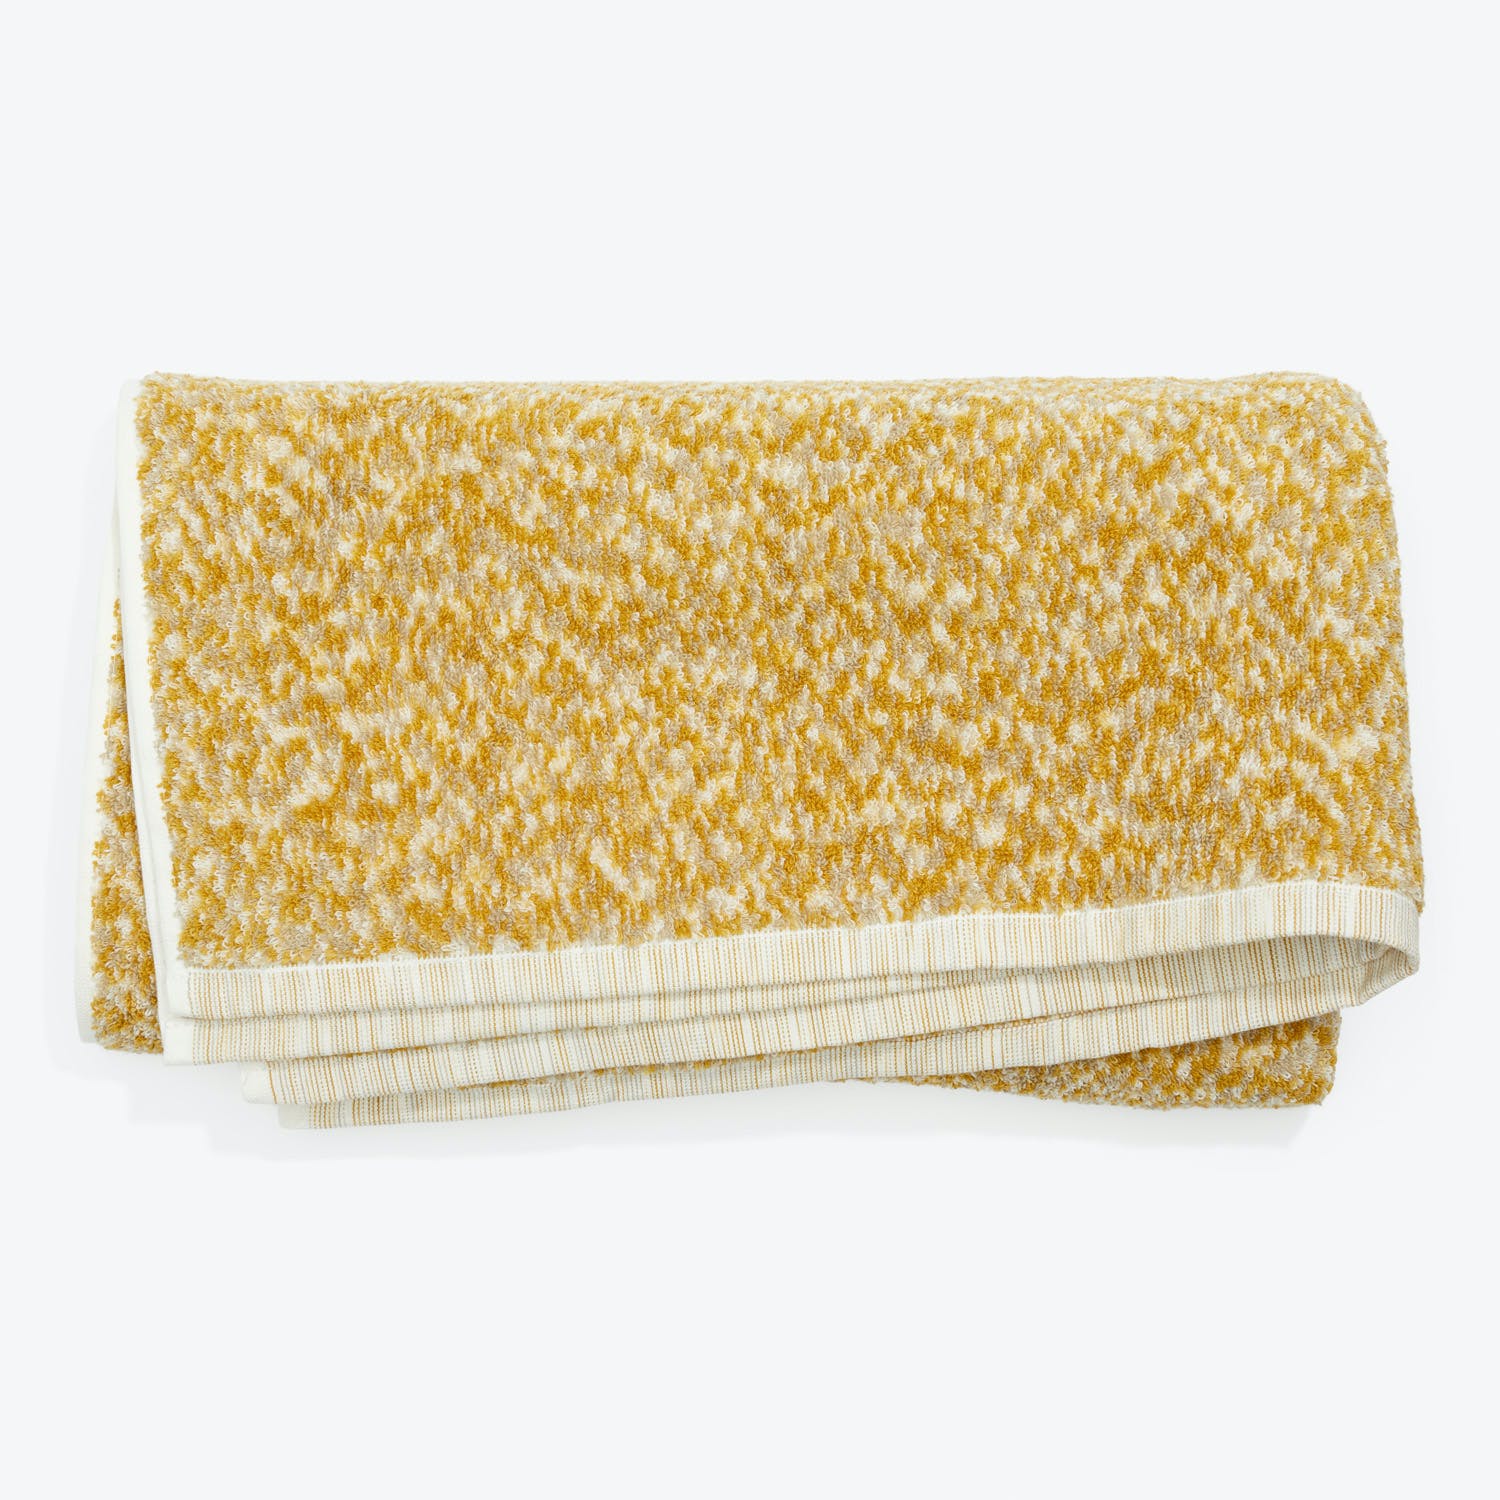 Vibrant yellow towel with striped border showcases textured terrycloth pattern.